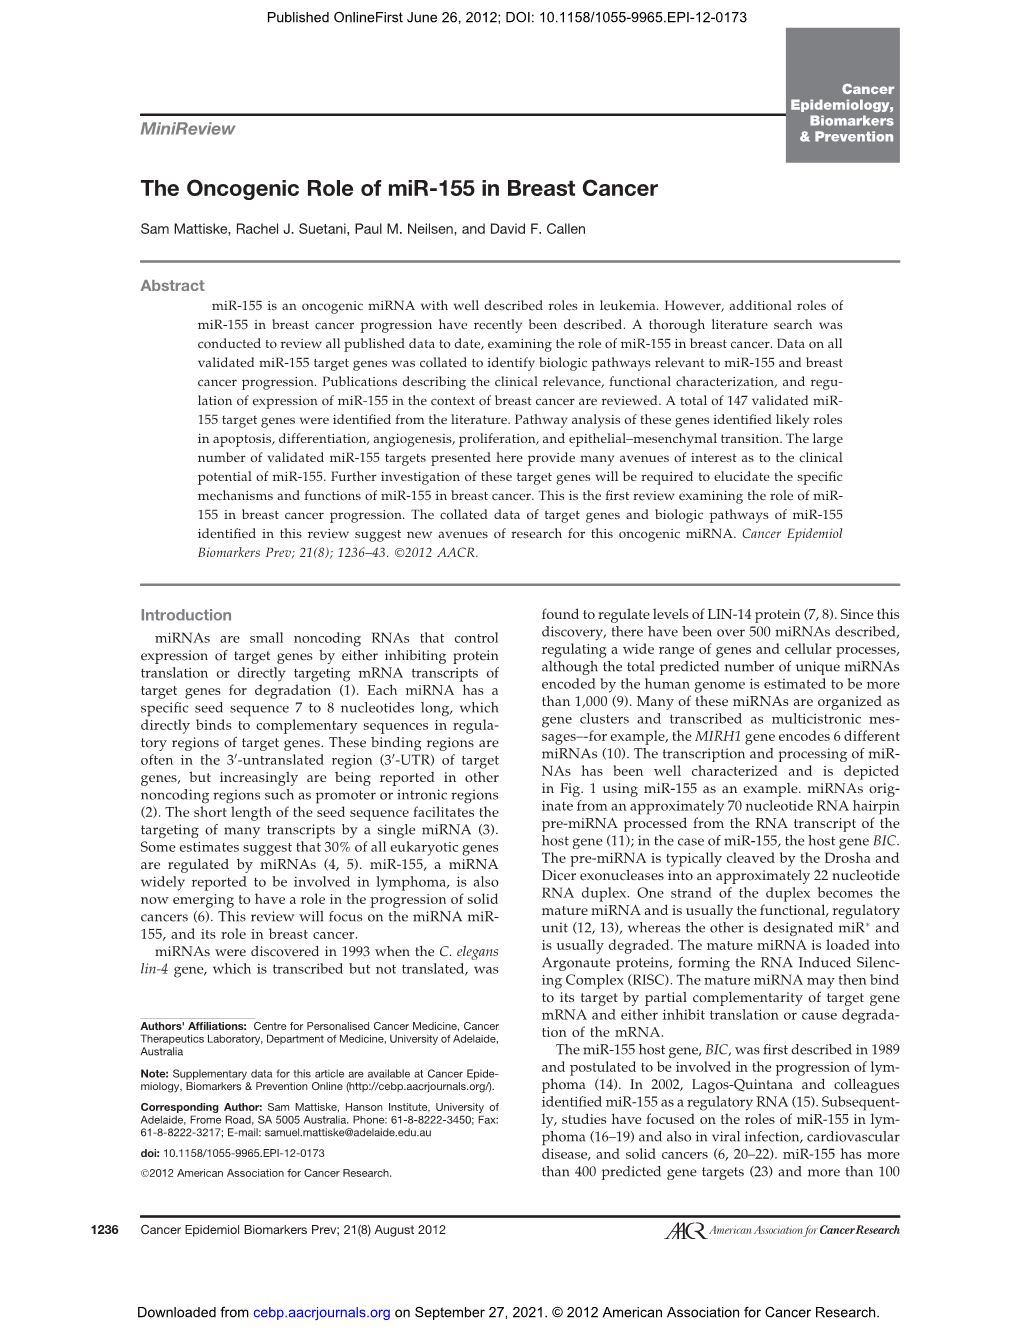 The Oncogenic Role of Mir-155 in Breast Cancer